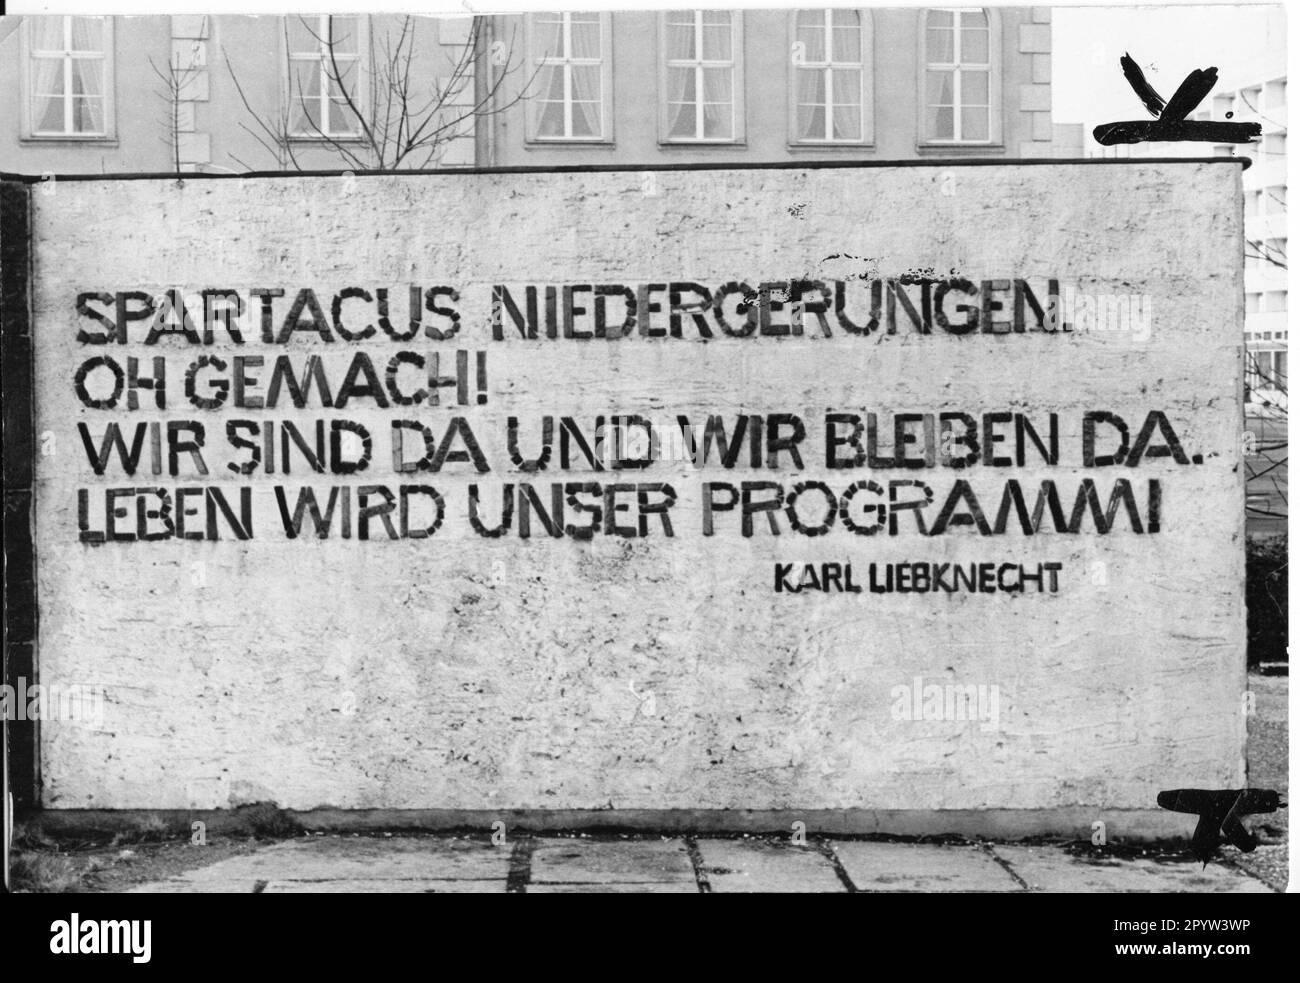 Potsdam Karl Liebknecht Forum Breite Straße formerly Wilhelm-Külz-Straße 1989. GDR.Historic. Quote from Karl Liebknecht: Spartacus put down. Oh Gemach. We are there and we stay there. Life will be our program. Photo: MAZ/MV/Christel Köster [automated translation] Stock Photo